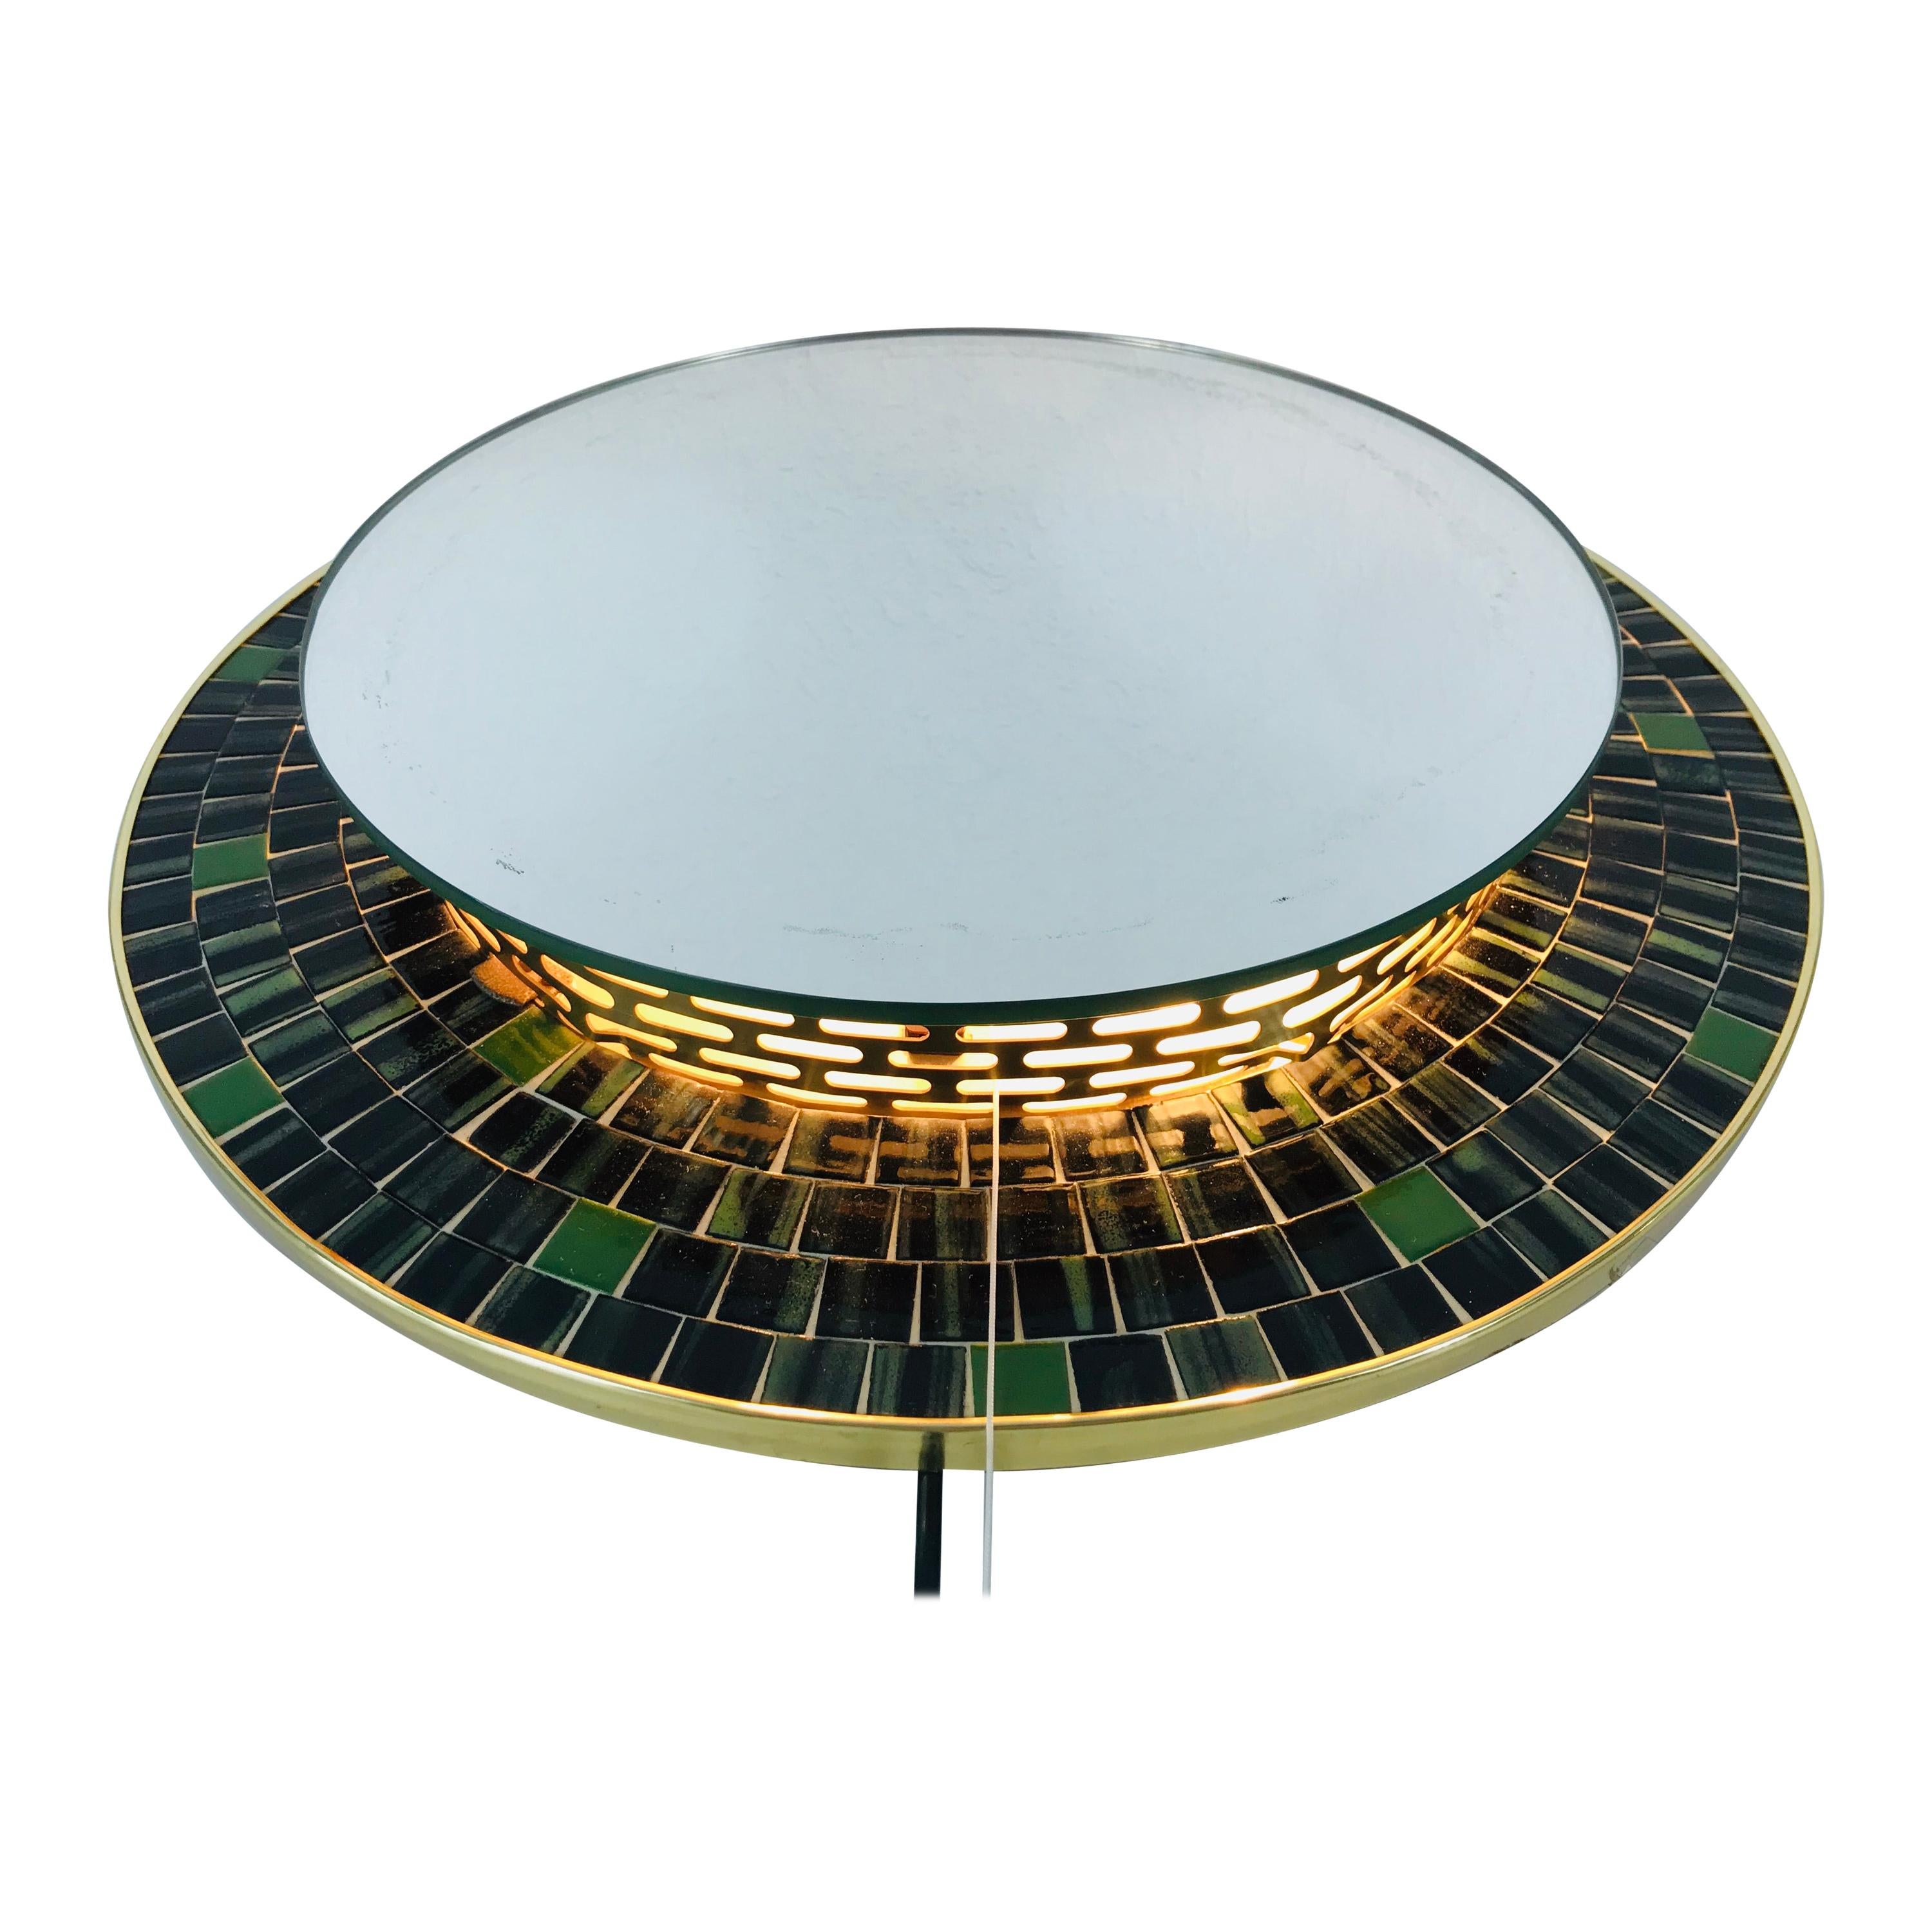 Midcentury Brass Illuminated Mirror Attributed to Hillebrand, Germany, 1950s For Sale